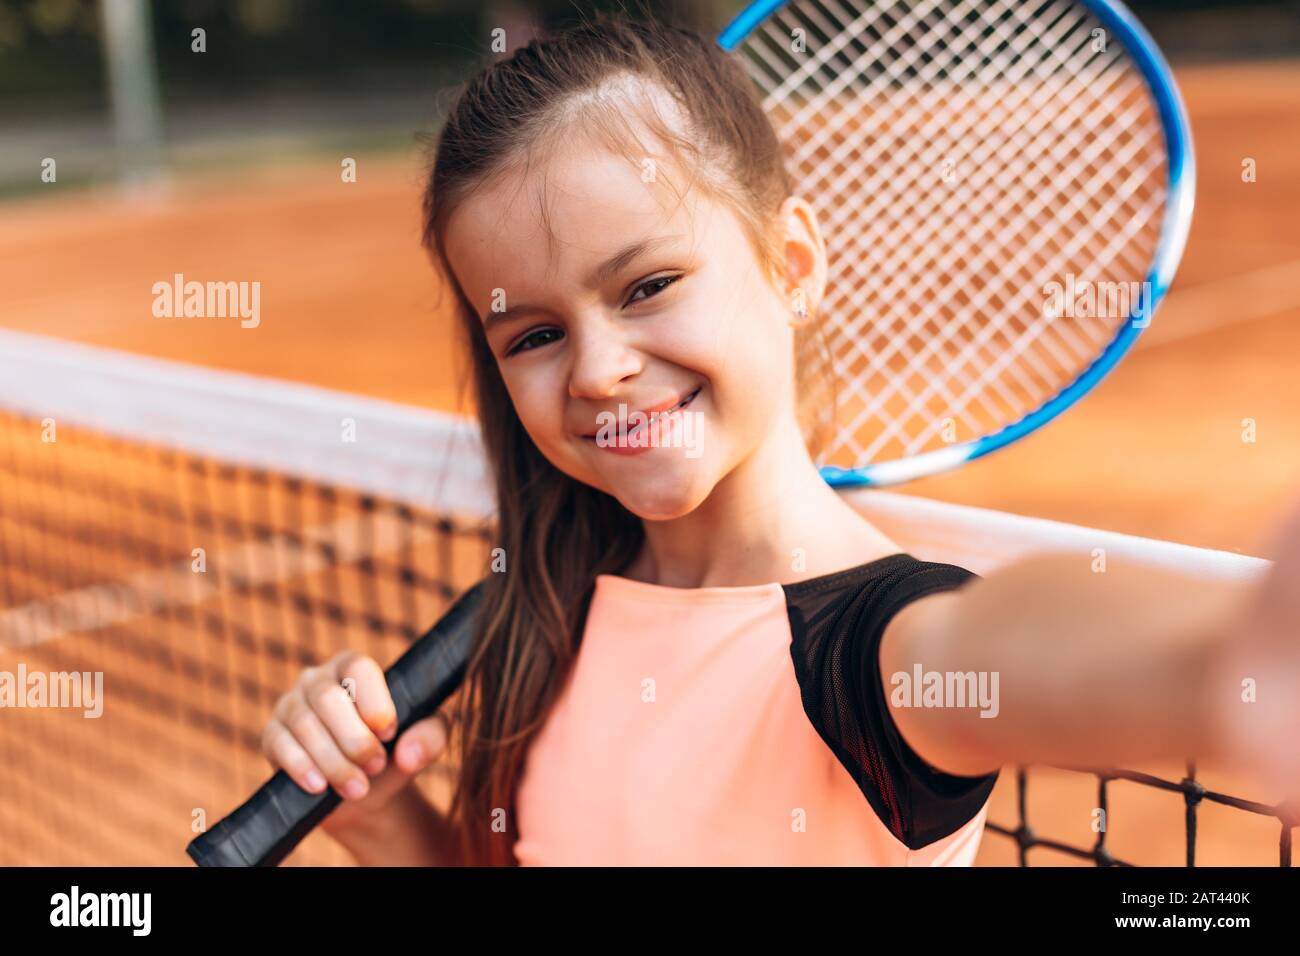 ?ute, pretty girl taking a selfie with a racquet on a tennis court Stock Photo